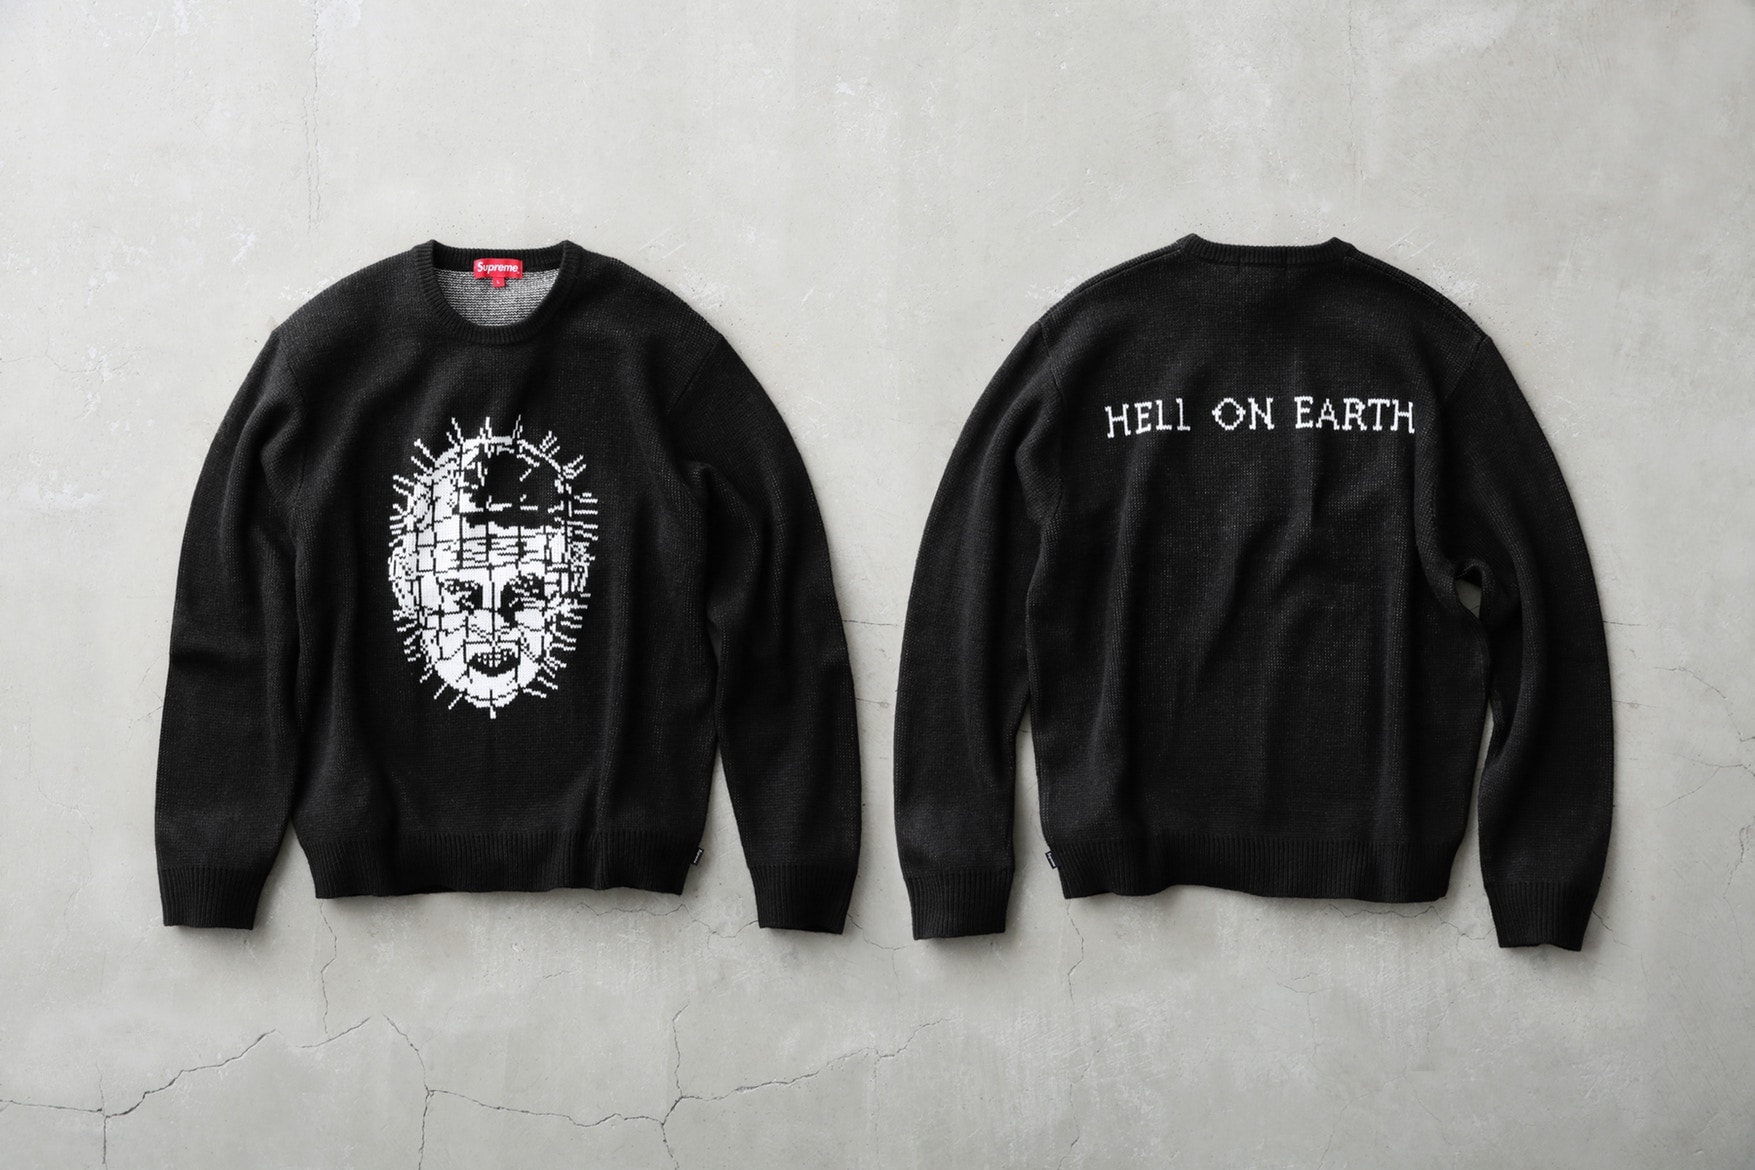 Supreme x Hellraiser Collection Release Date Info Where to Buy Hoodies Sweater T-shirt Skateboard Skate Deck Beanie Jacket Pinhead